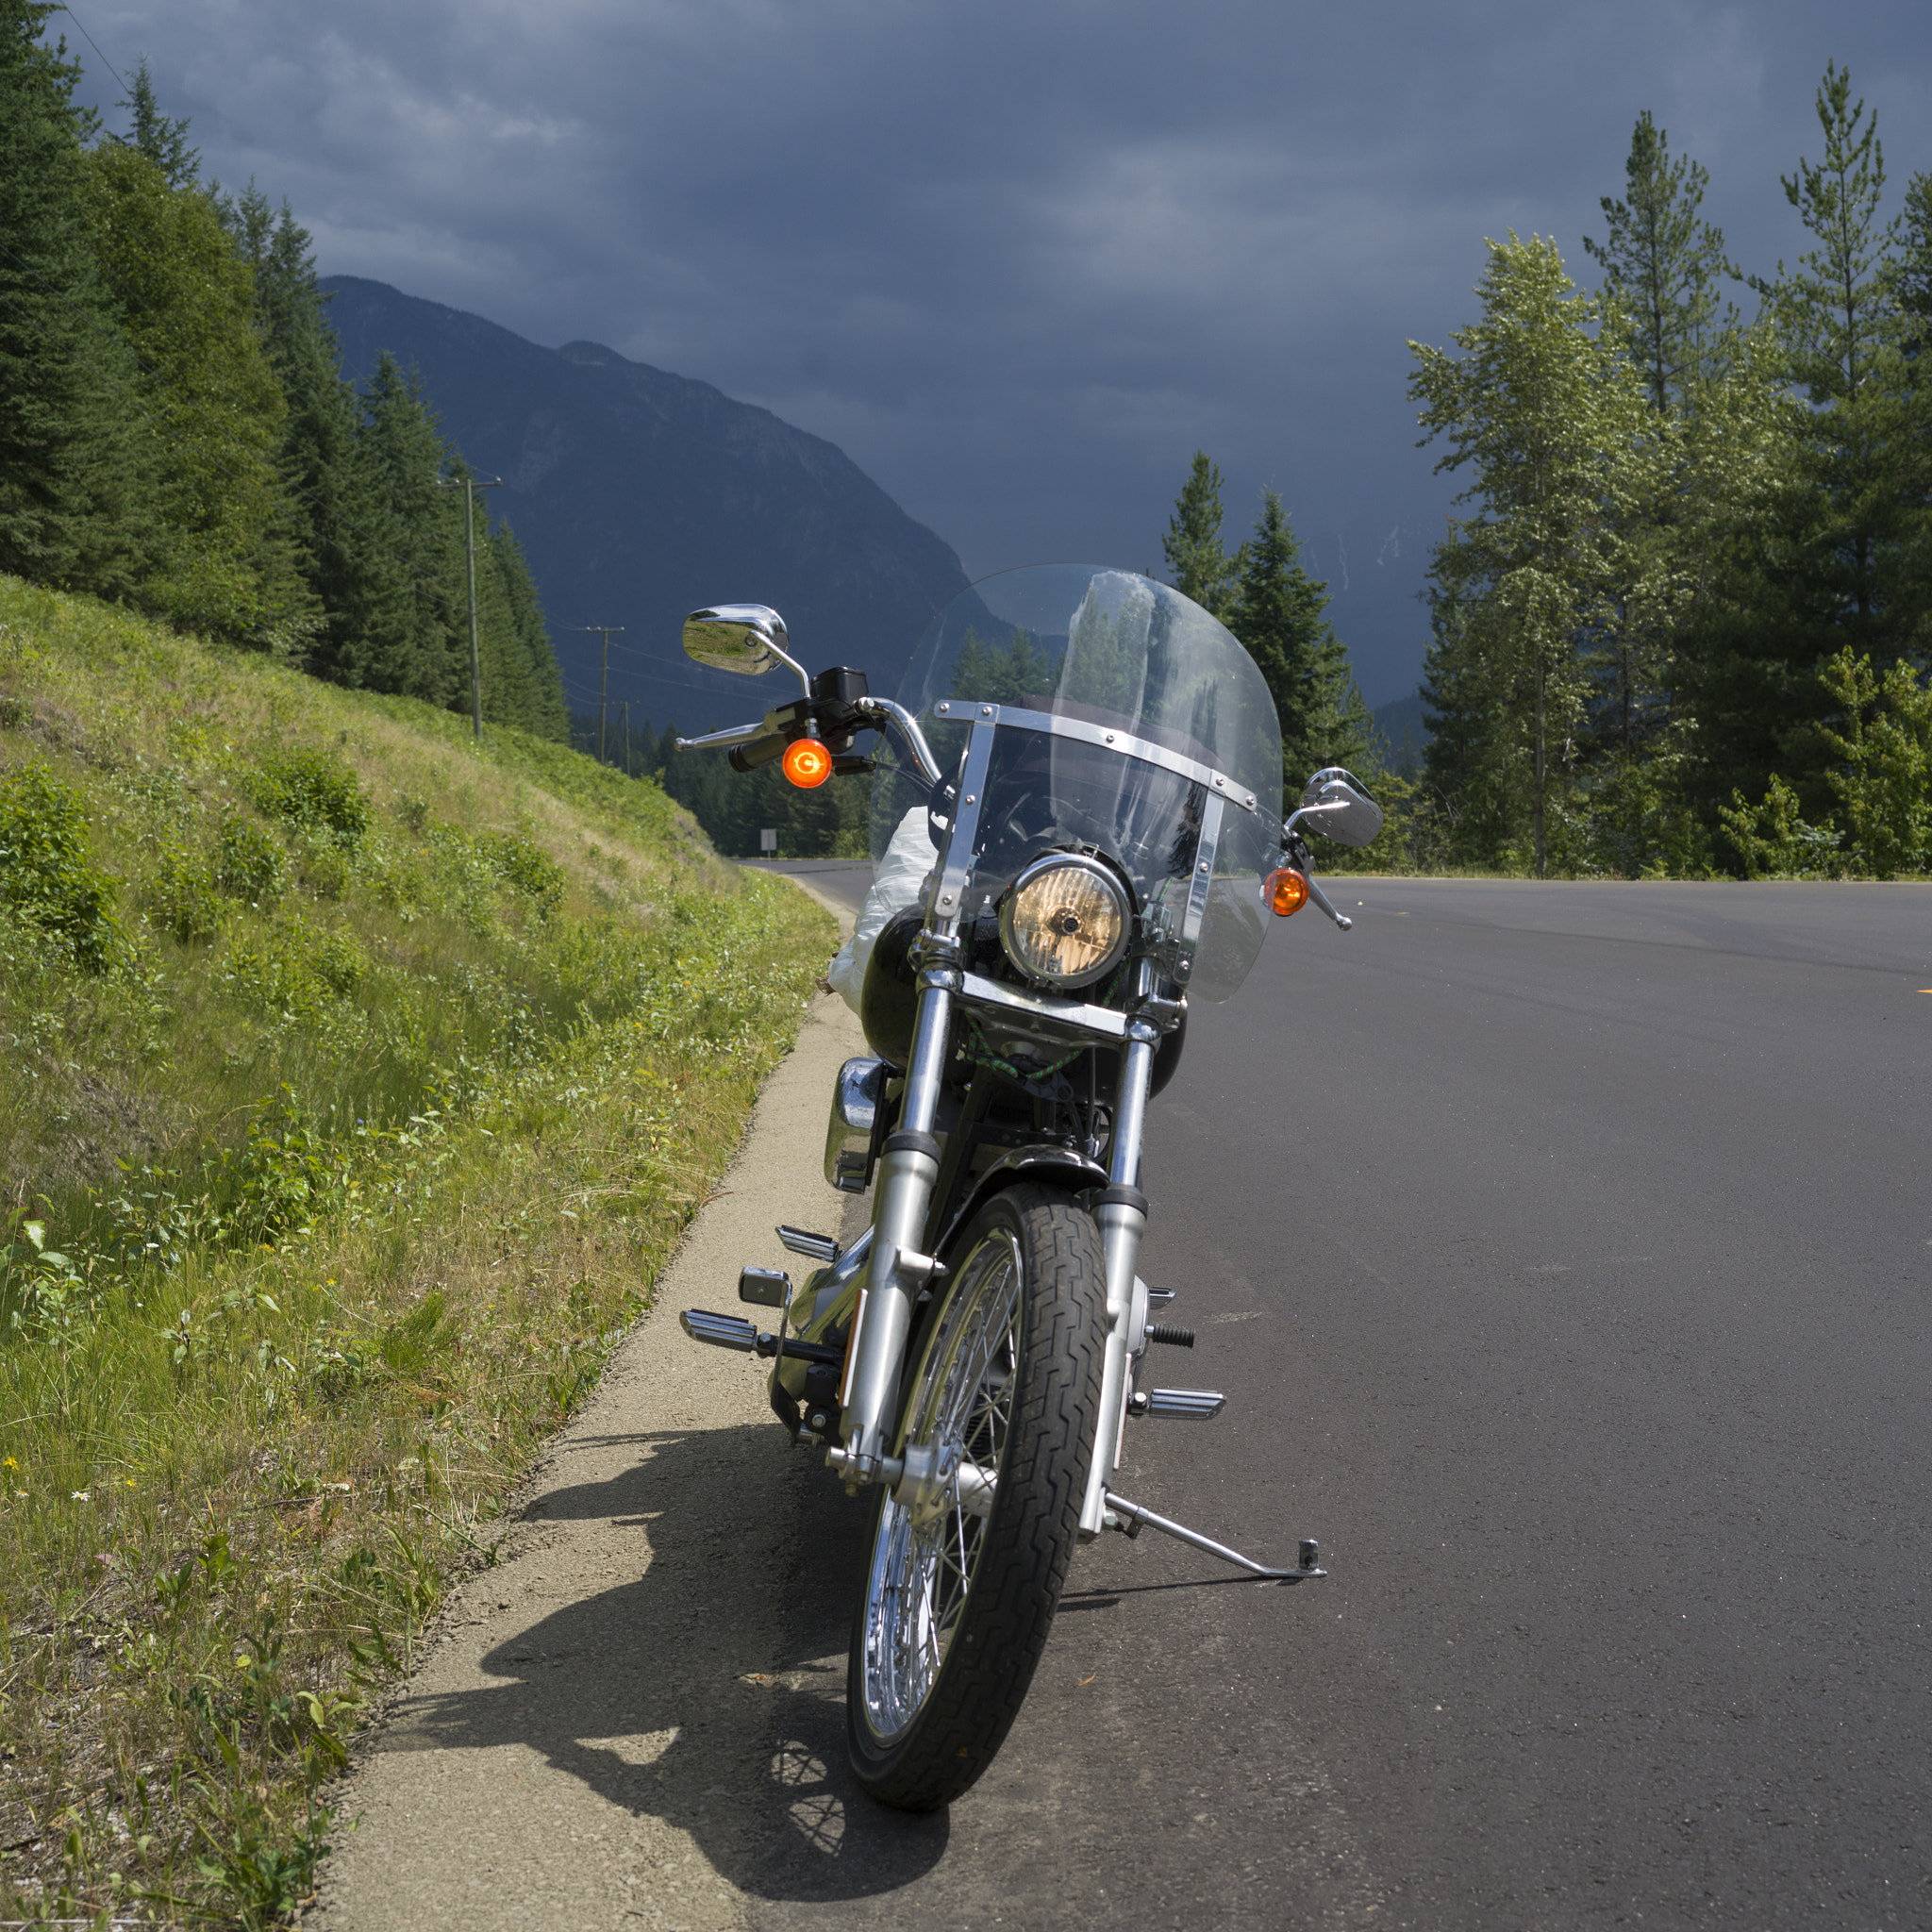 Hasselblad X1D-50c sample photo. Motorcycle parked at roadside, new denver, british columbia, can photography